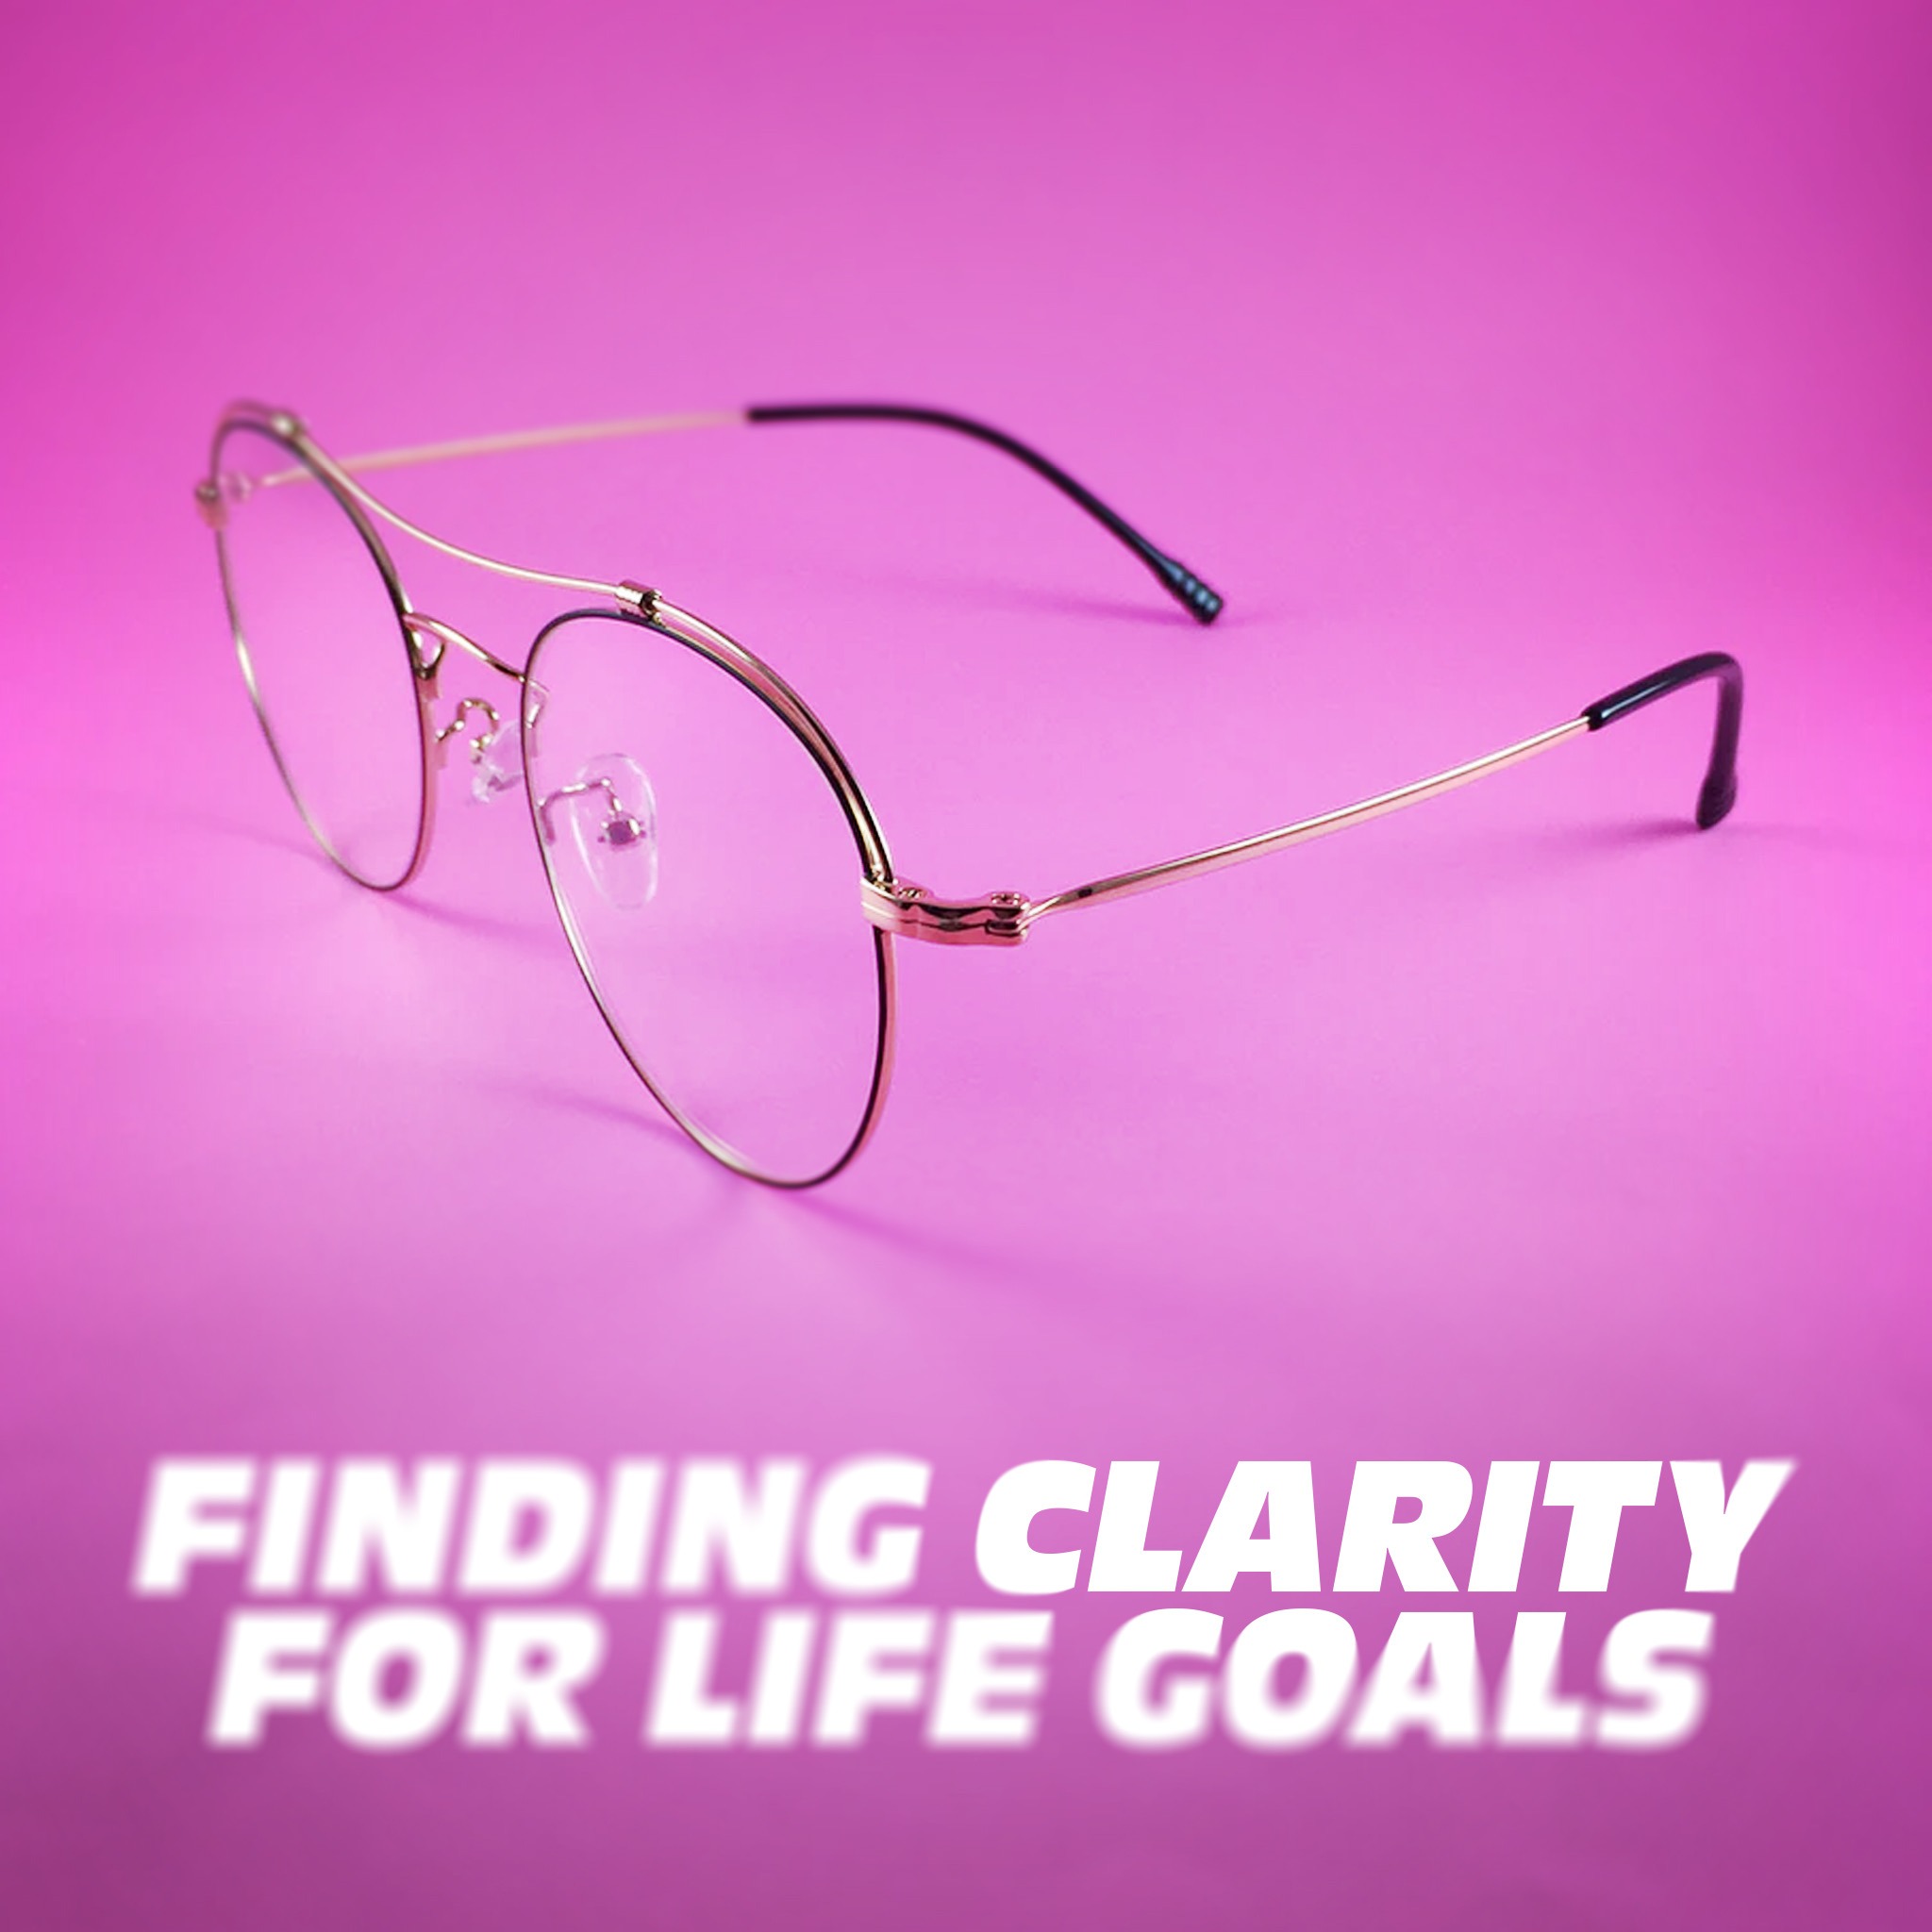 How to Find Clarity in Your Life Goals